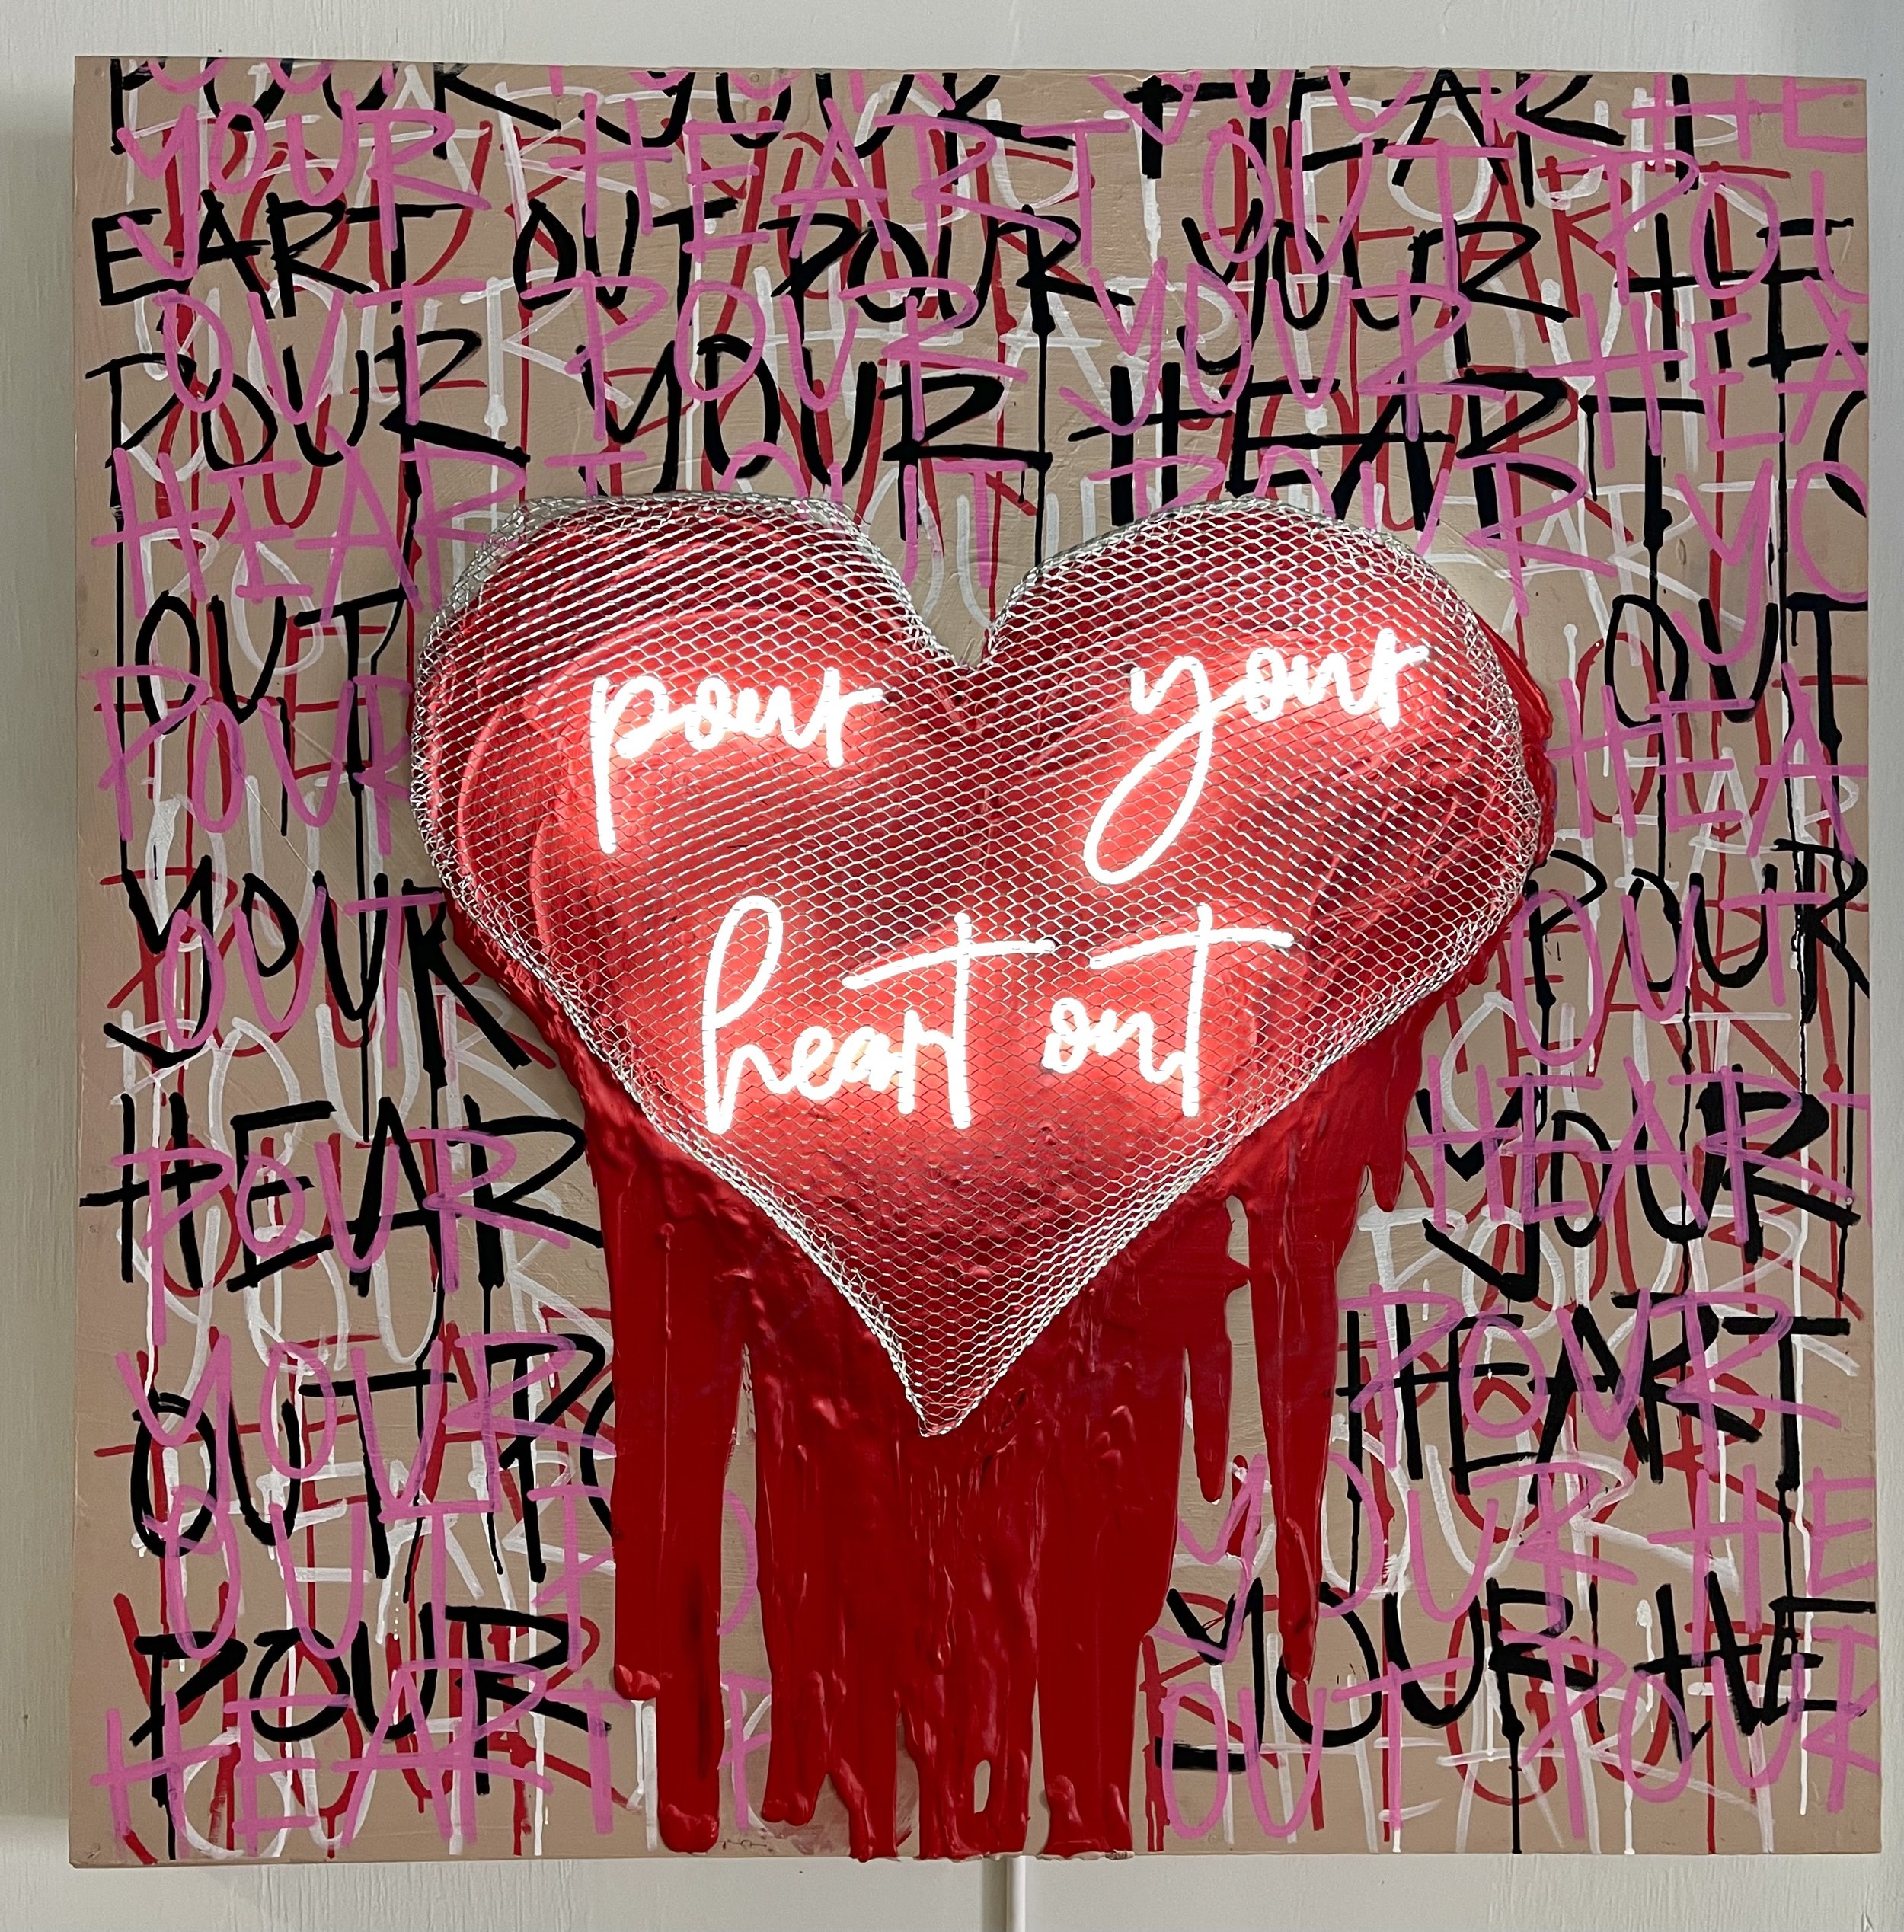 "Pour Your Heart Out"